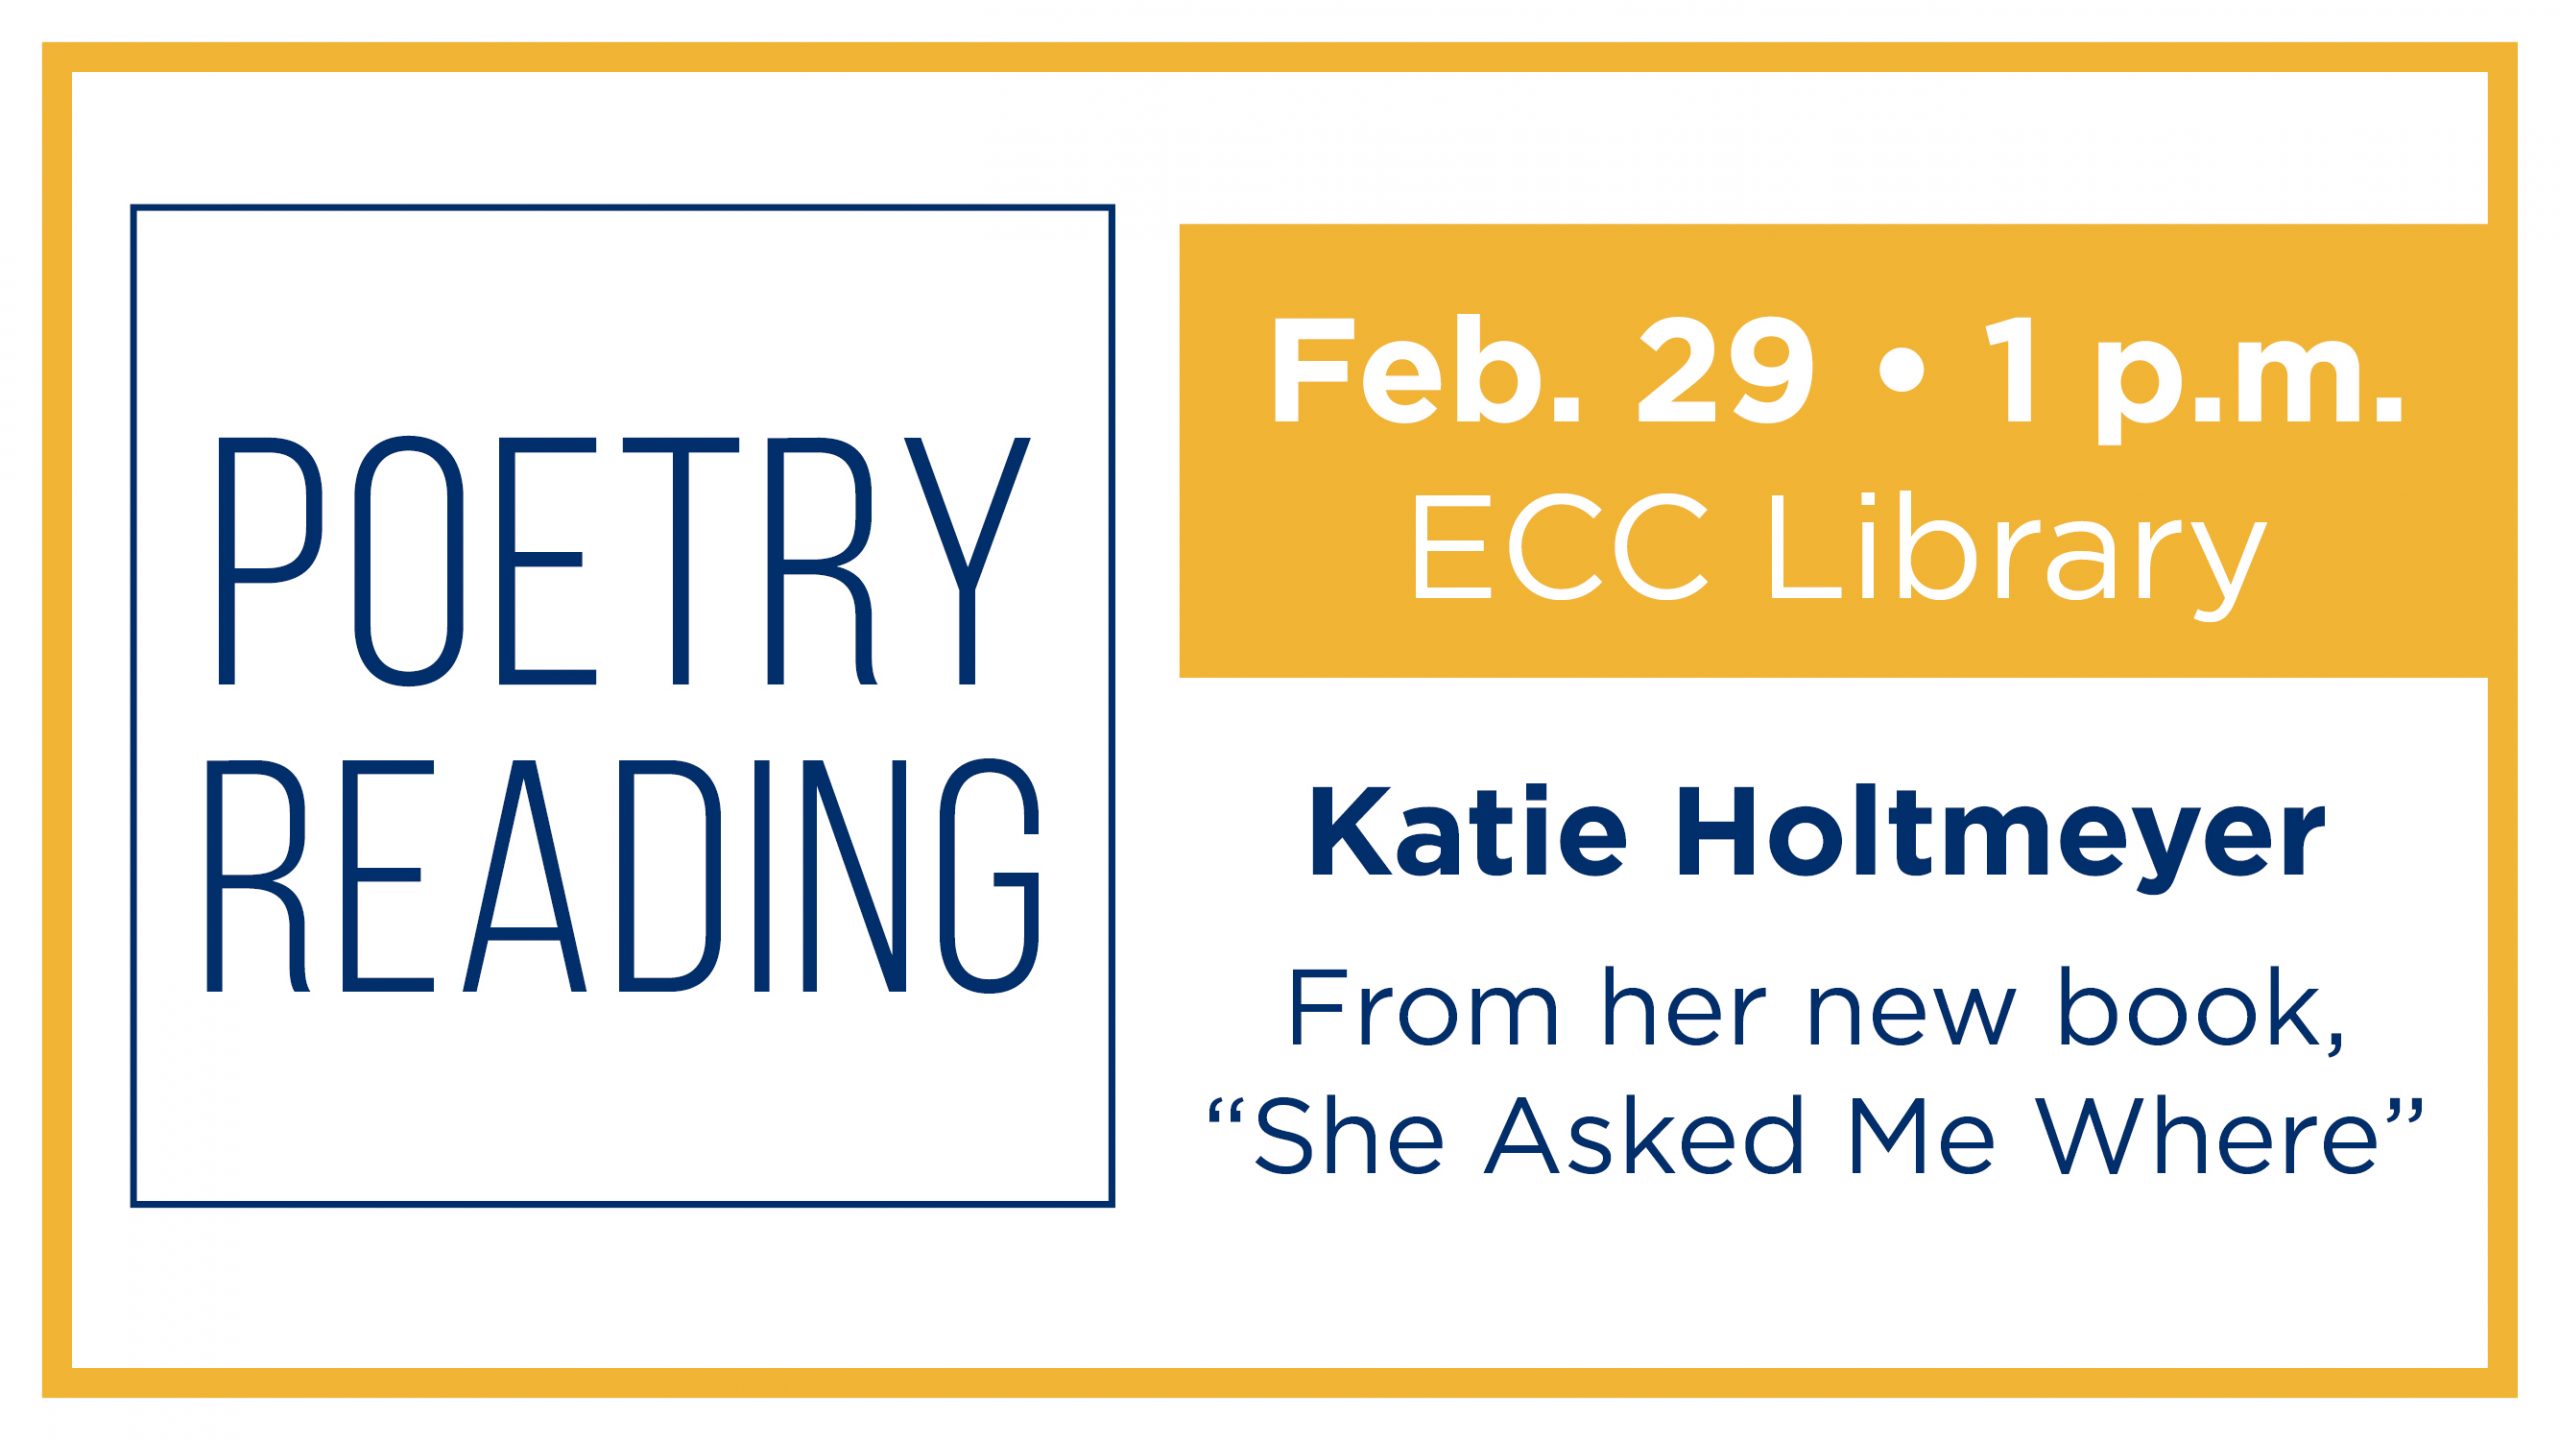 Poetry Reading – Katie Holtmeyer